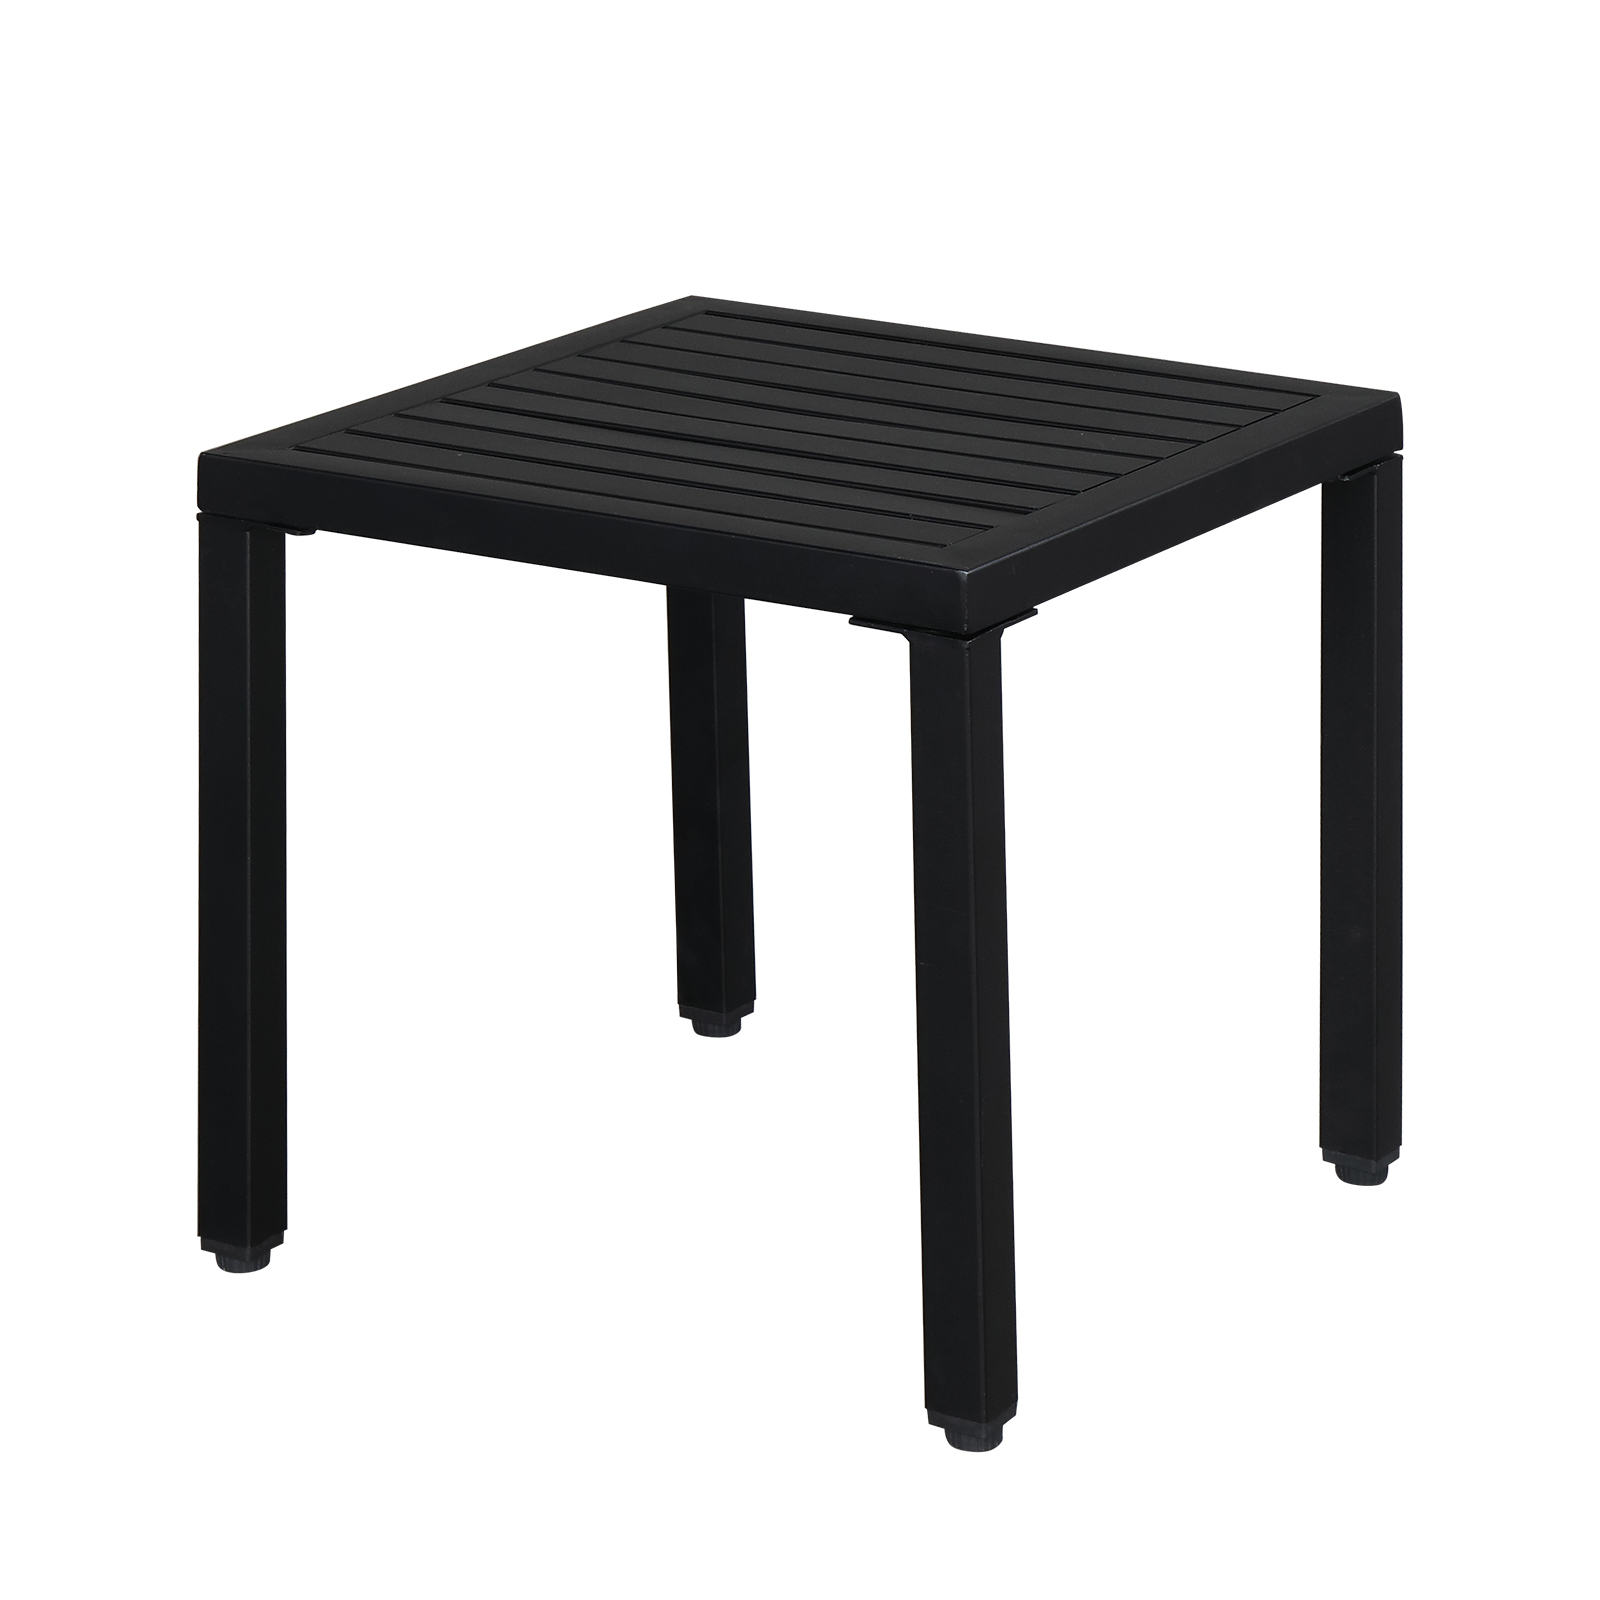 BTMWAY Metal Outdoor Dining Table, Patio Furniture Coffee Table Metal Side Table, Modern Square Tea Table Bar Table for Garden Yard Balcony Lawn Front Porch, Black - image 5 of 11